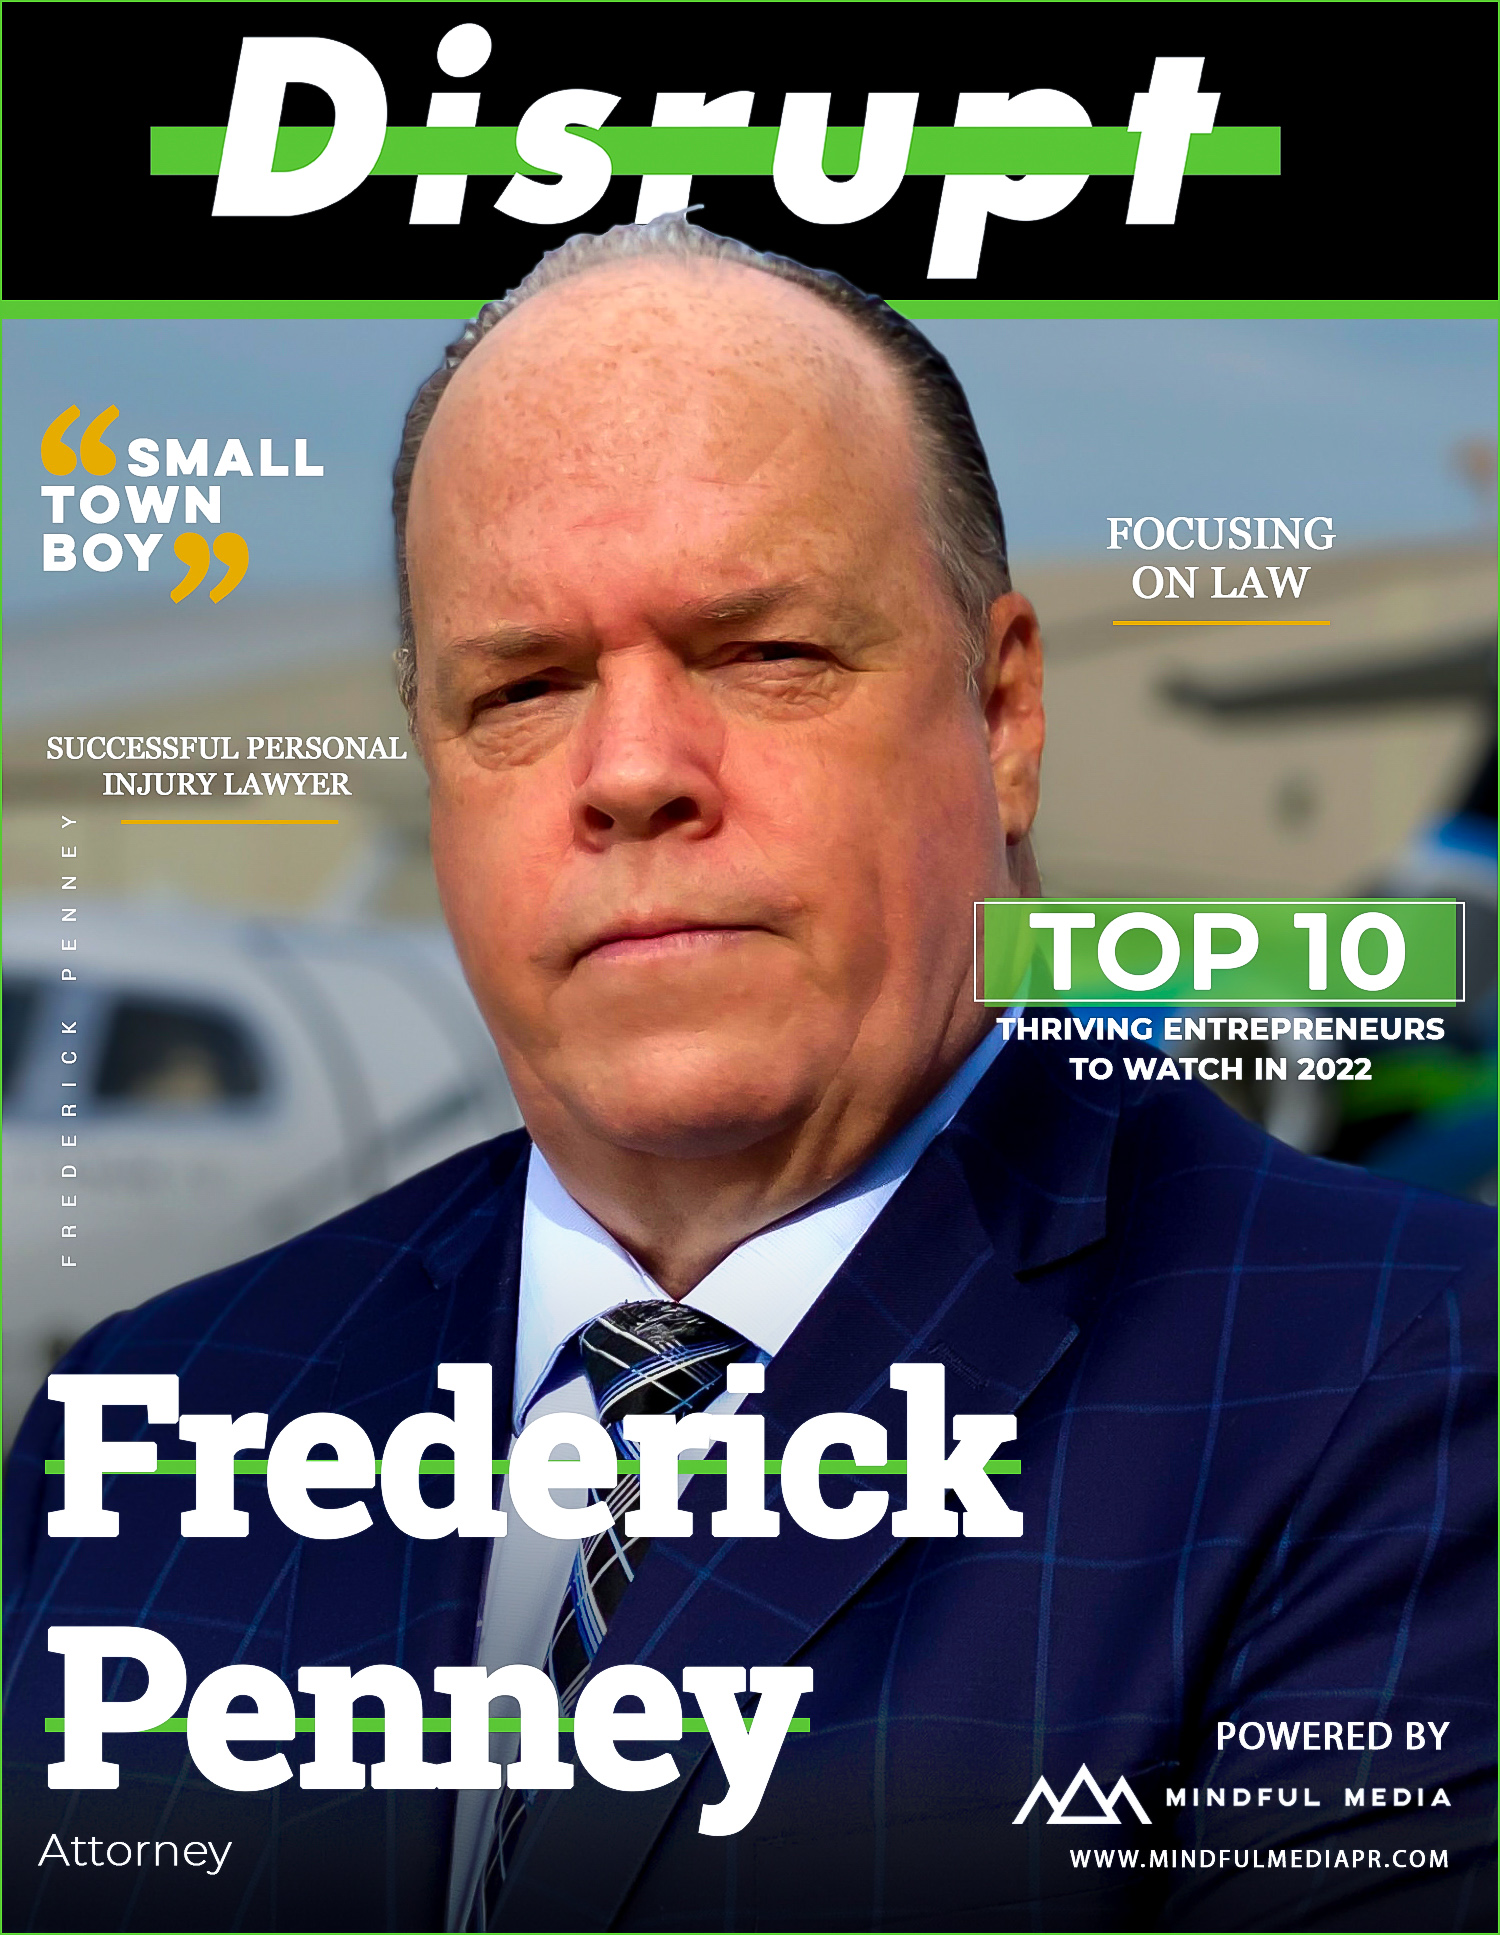 Fred Penney Ranks on Top 10 Thriving Entrepreneurs To Watch List!